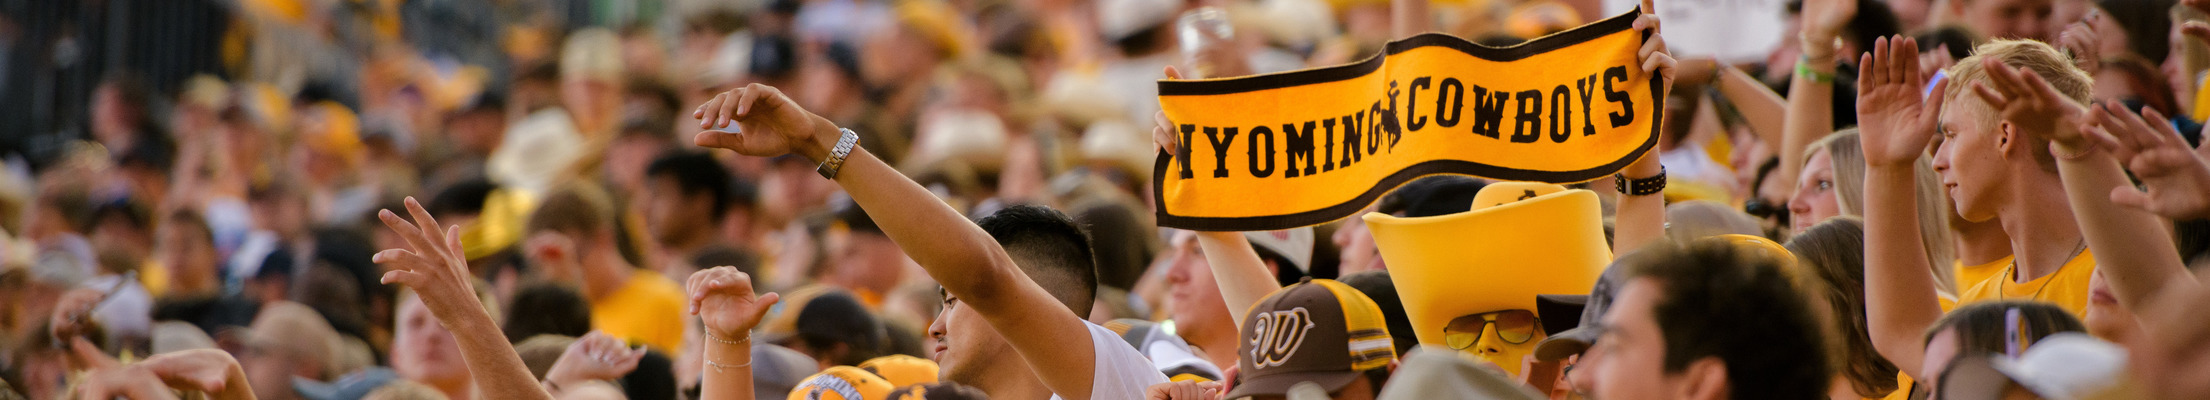 A Wyoming Cowboy flag is head up among fans at a UW football game.